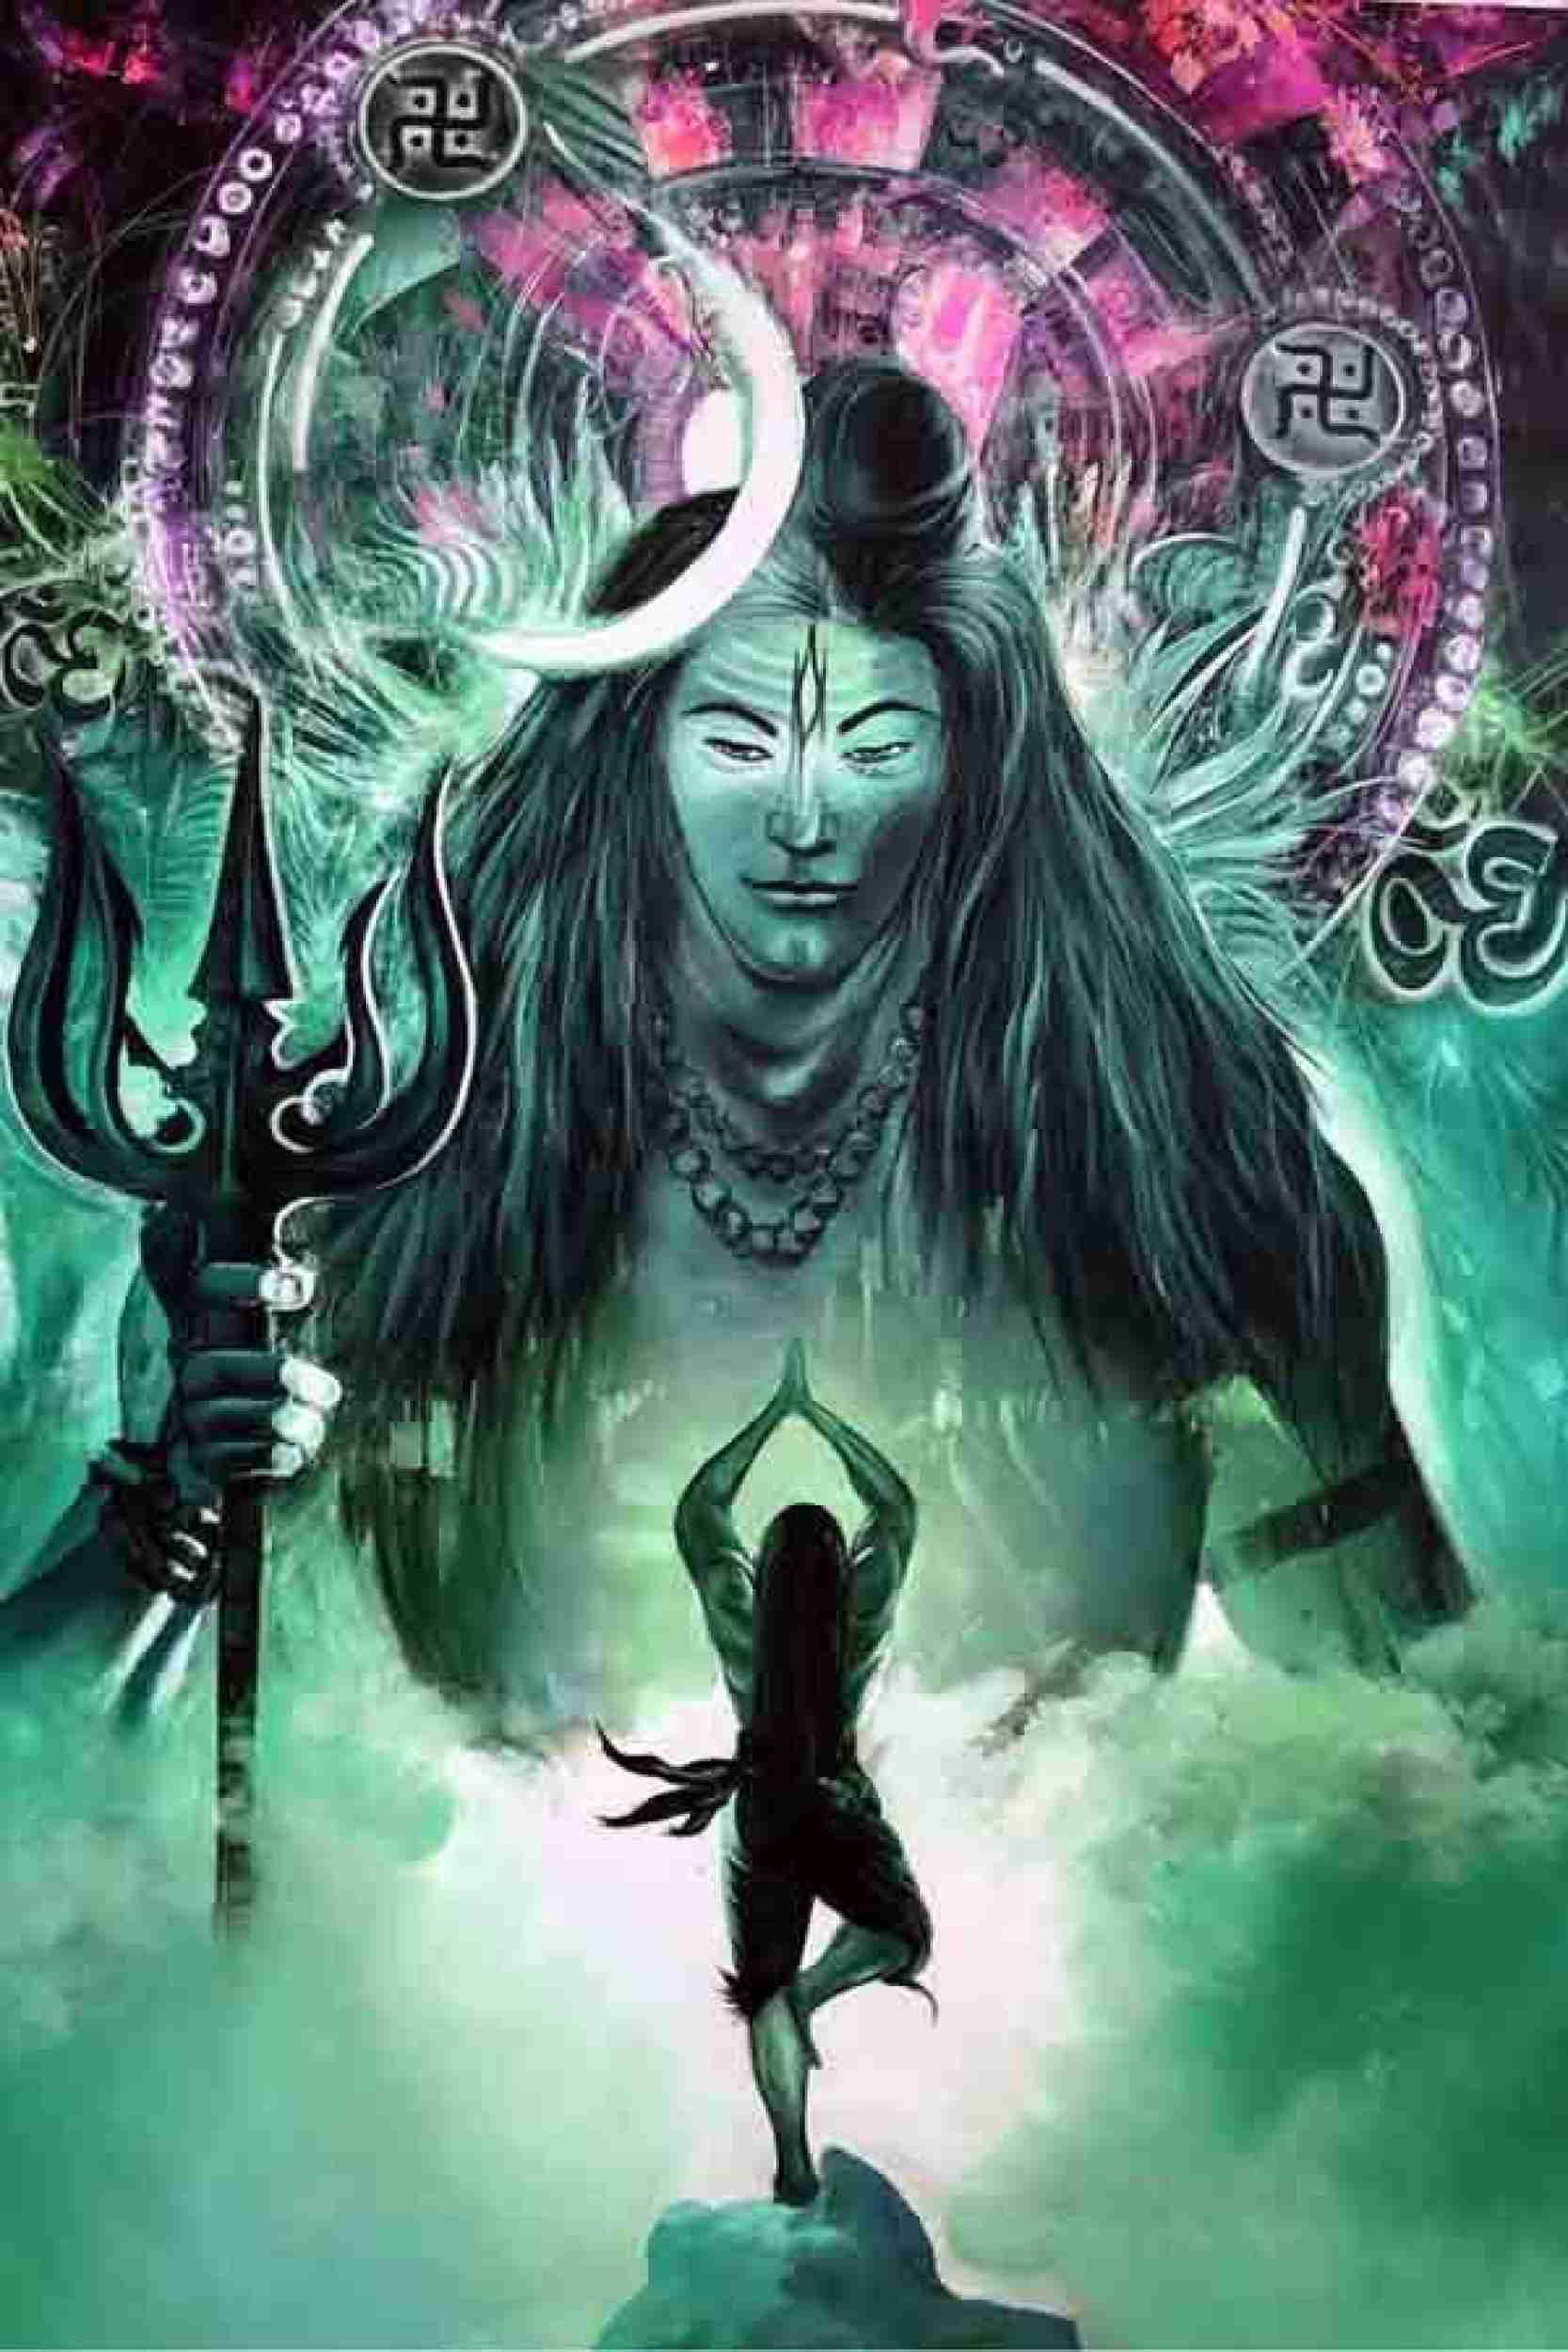 Lord Mahadev | Mahakal | Bholenath | Shiva Religious Painting Poster  Waterproof Vinyl Sticker for Home Decor || (24X18 inches) can1371-2 Fine  Art Print - Religious posters in India - Buy art,